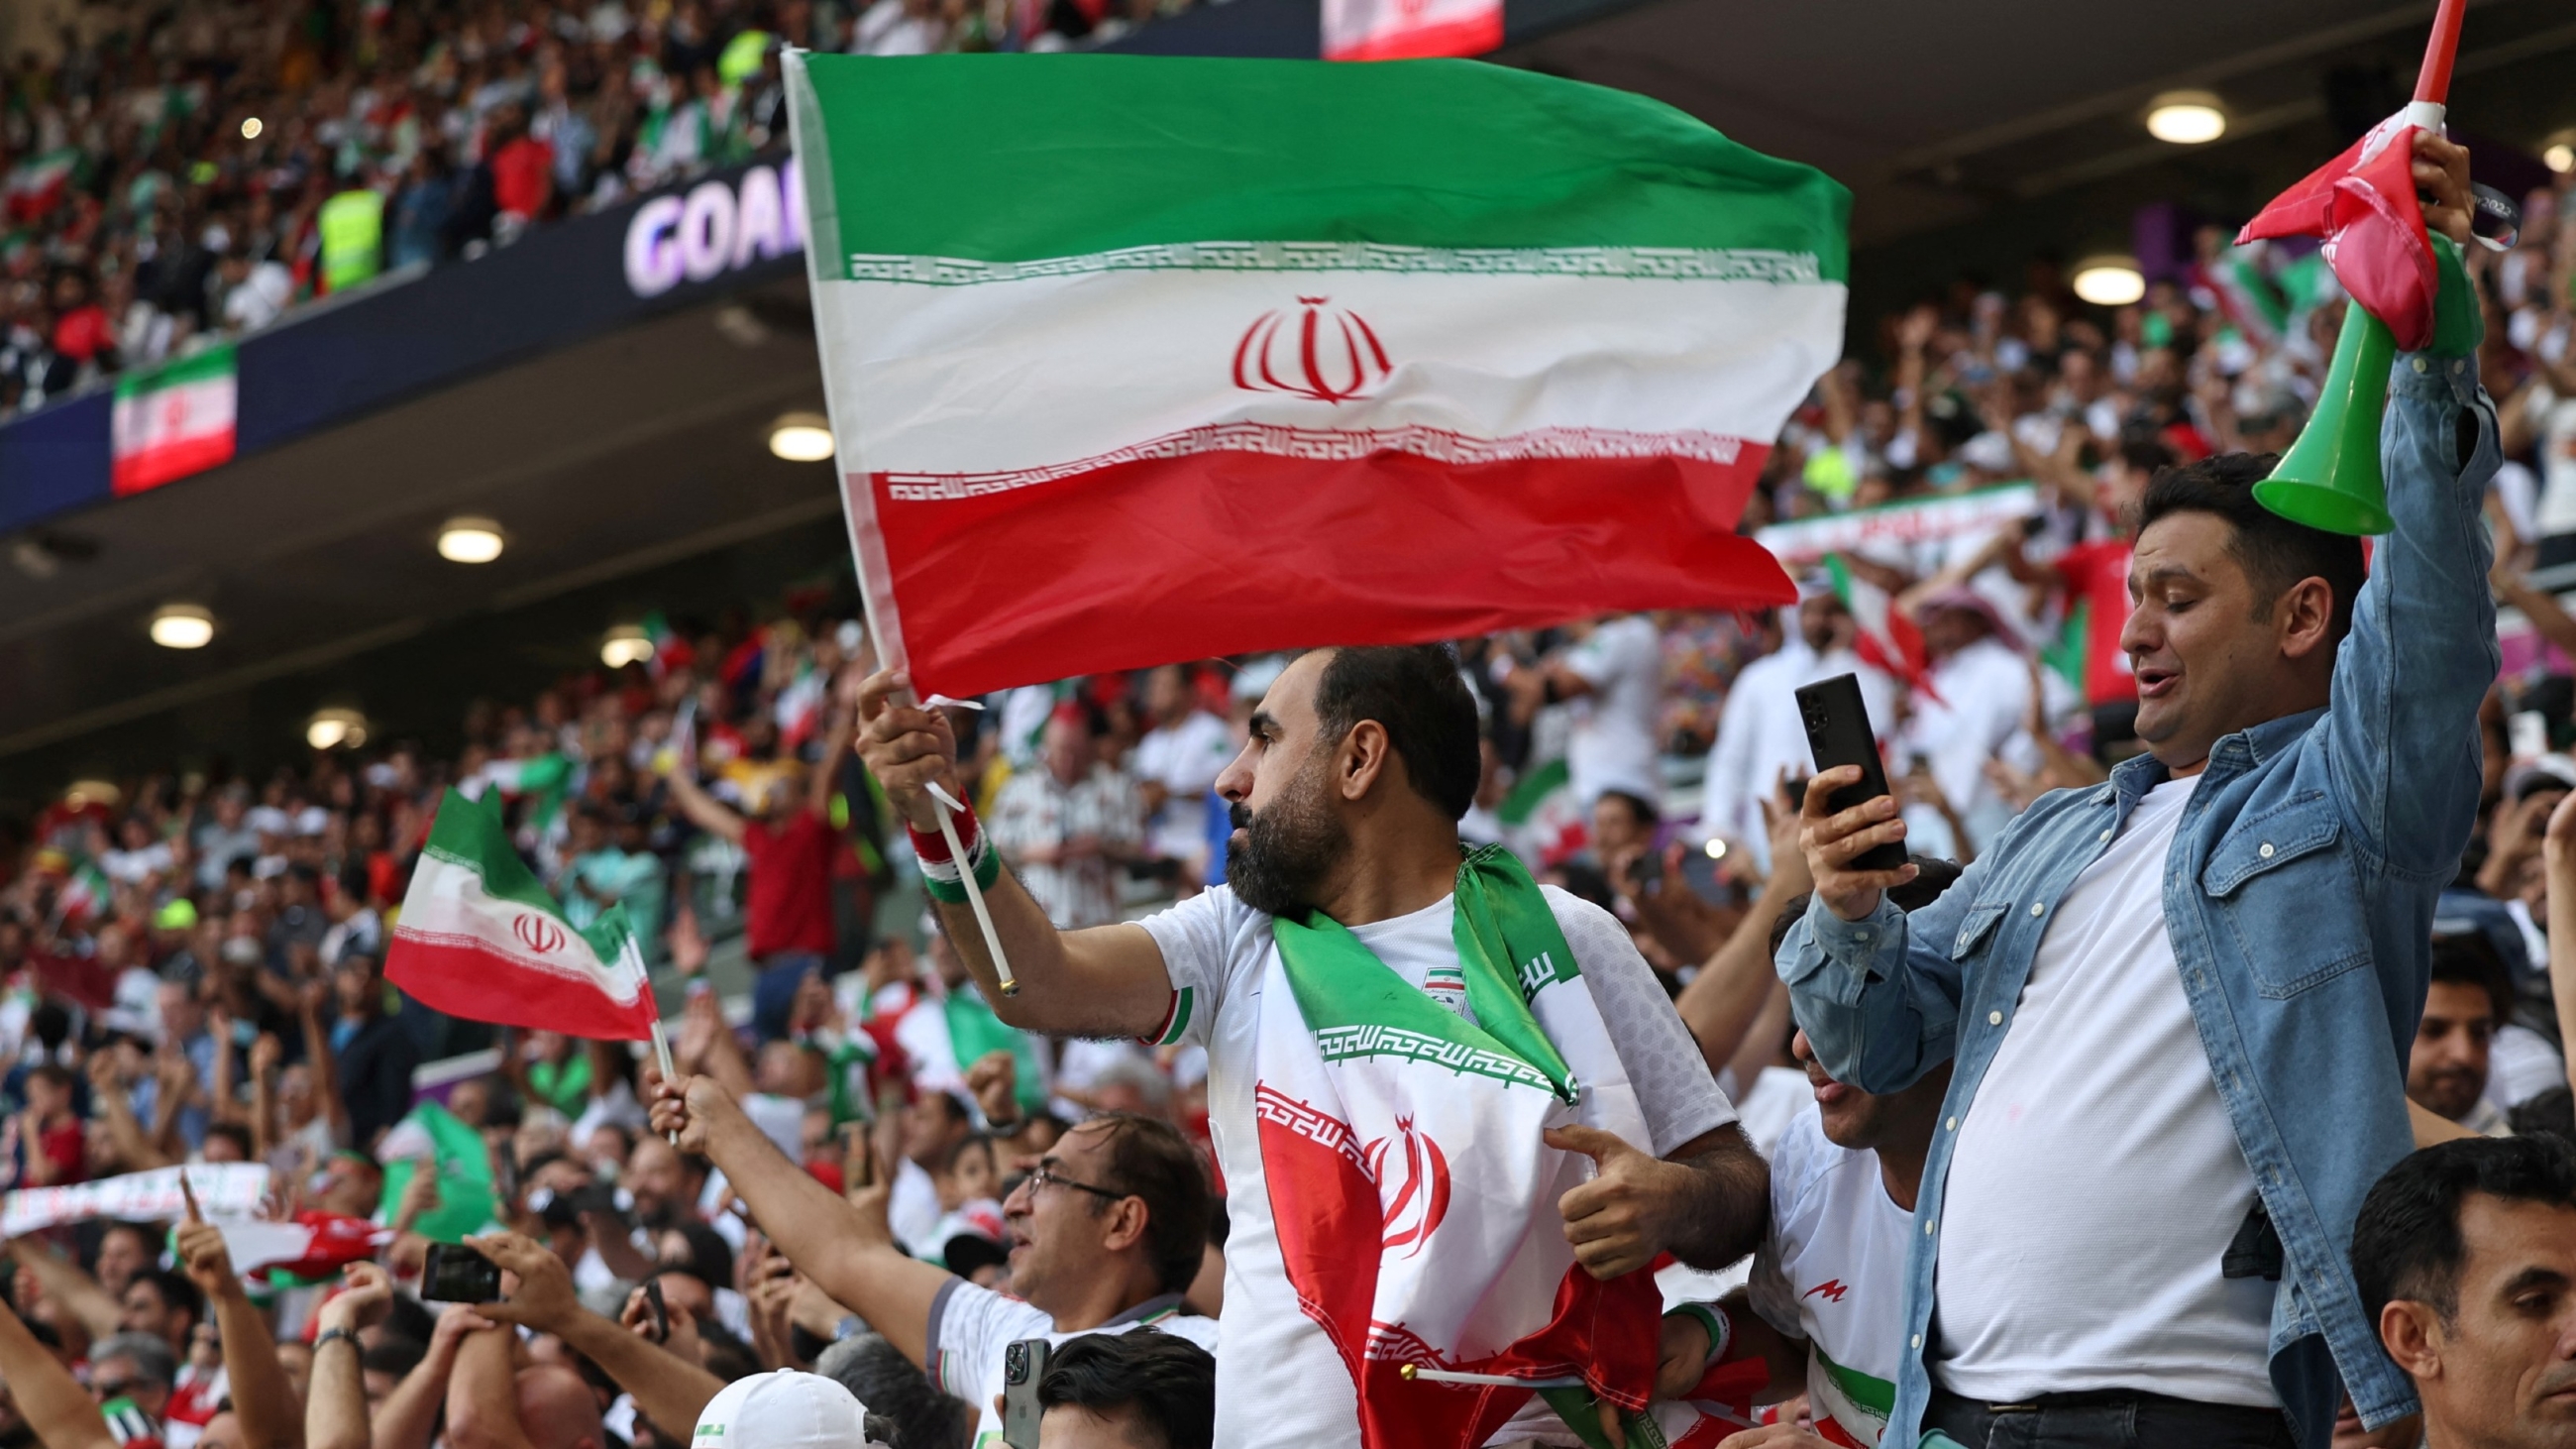 Iran's fans celebrate at the end of the Qatar 2022 World Cup Group B football match between Wales and Iran at the Ahmad Bin Ali Stadium in Al-Rayyan, west of Doha on 25 November 2022 (AFP)